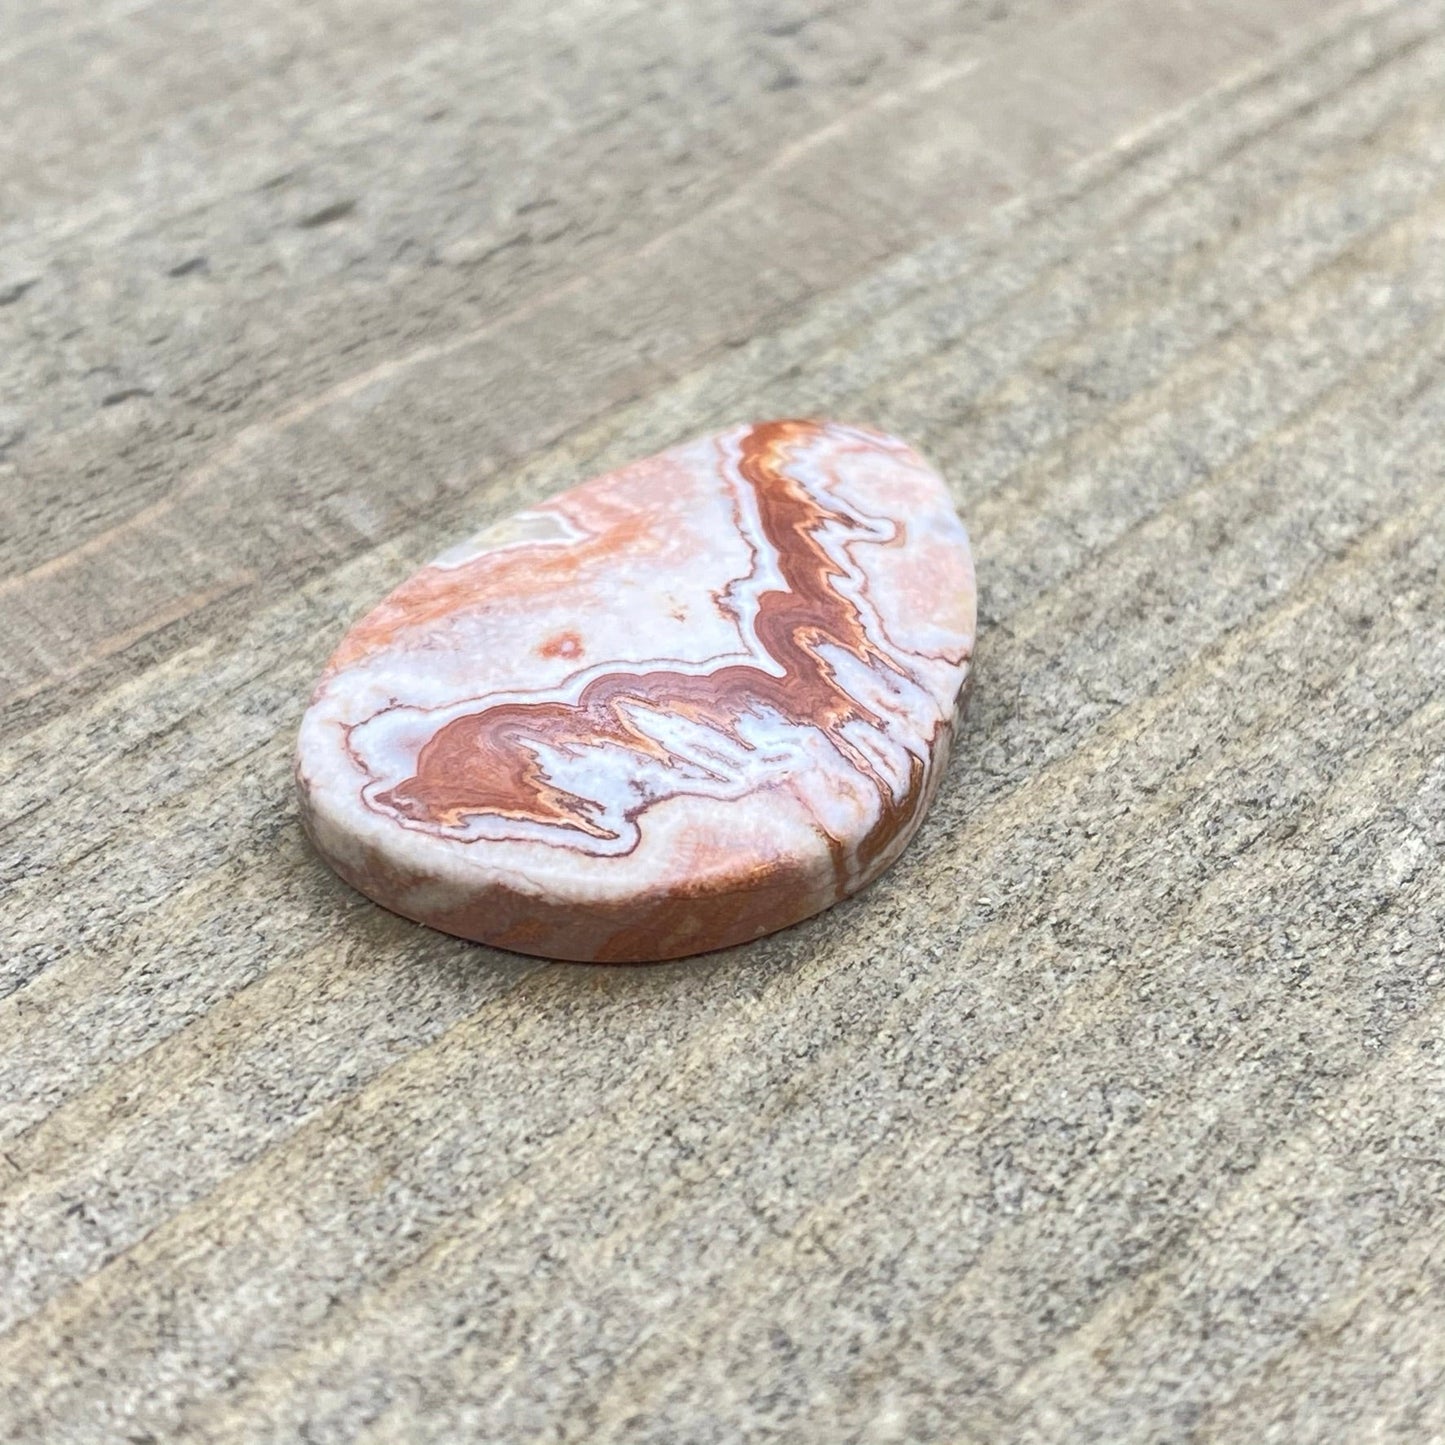 Crazy Lace Agate Cabochon - 16 Carats - Earth & Hammer